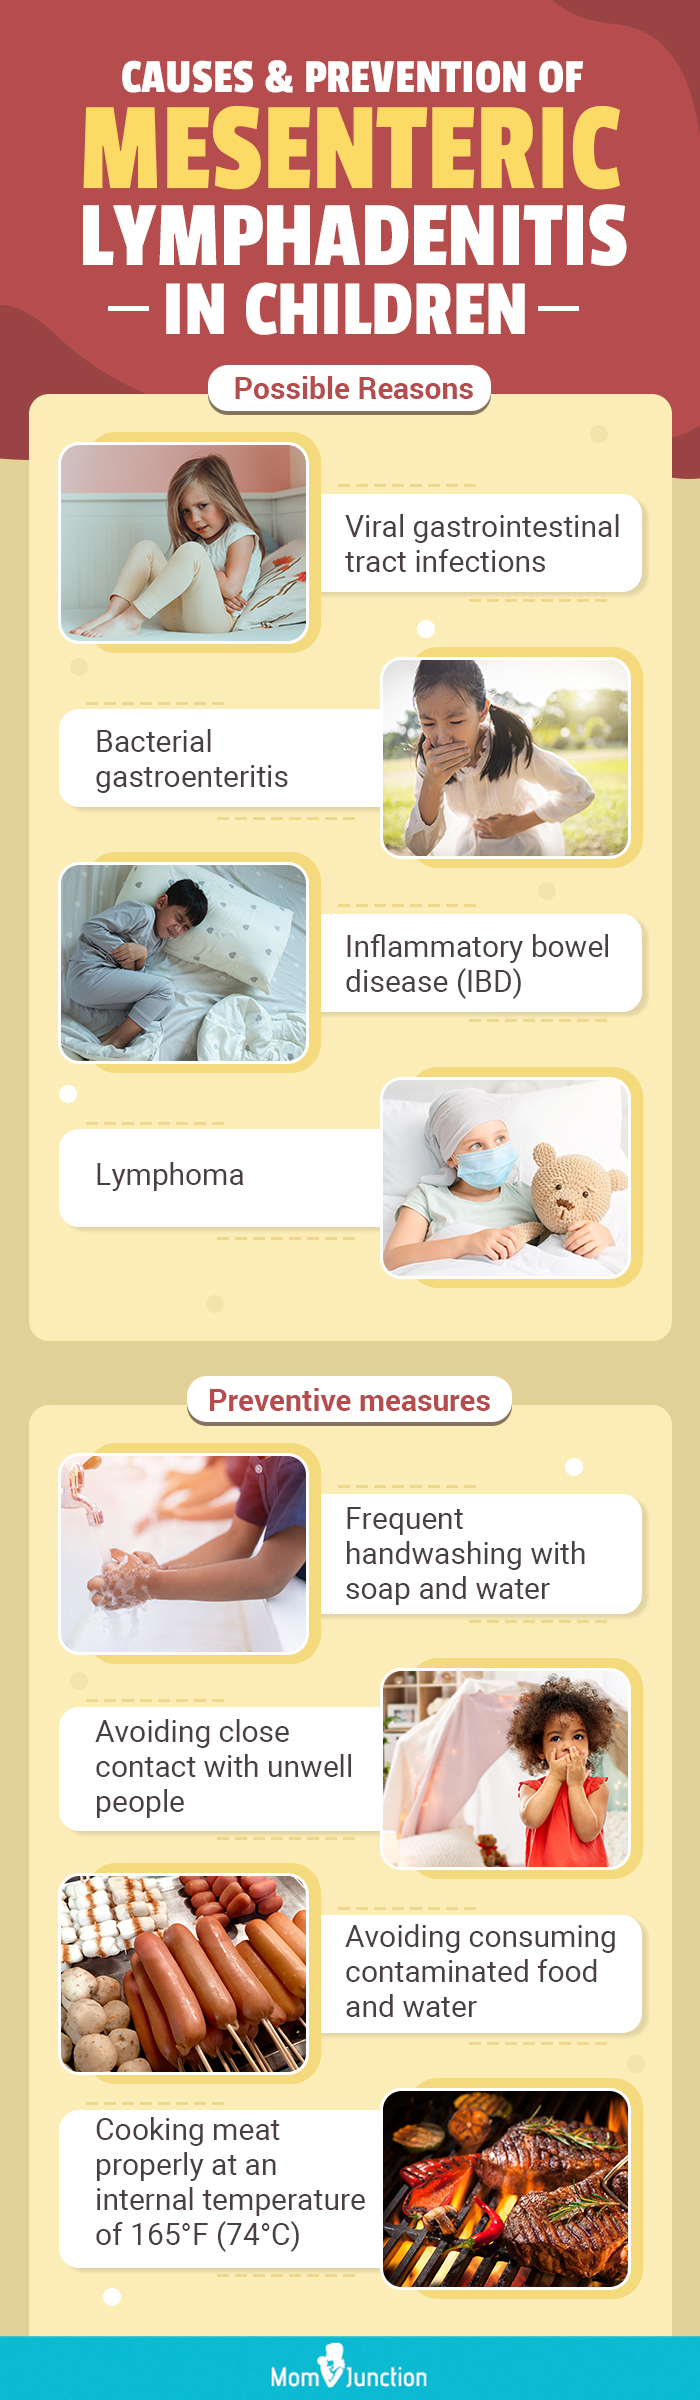 causes and prevention of mesenteric lymphadenitis in children(infographic)